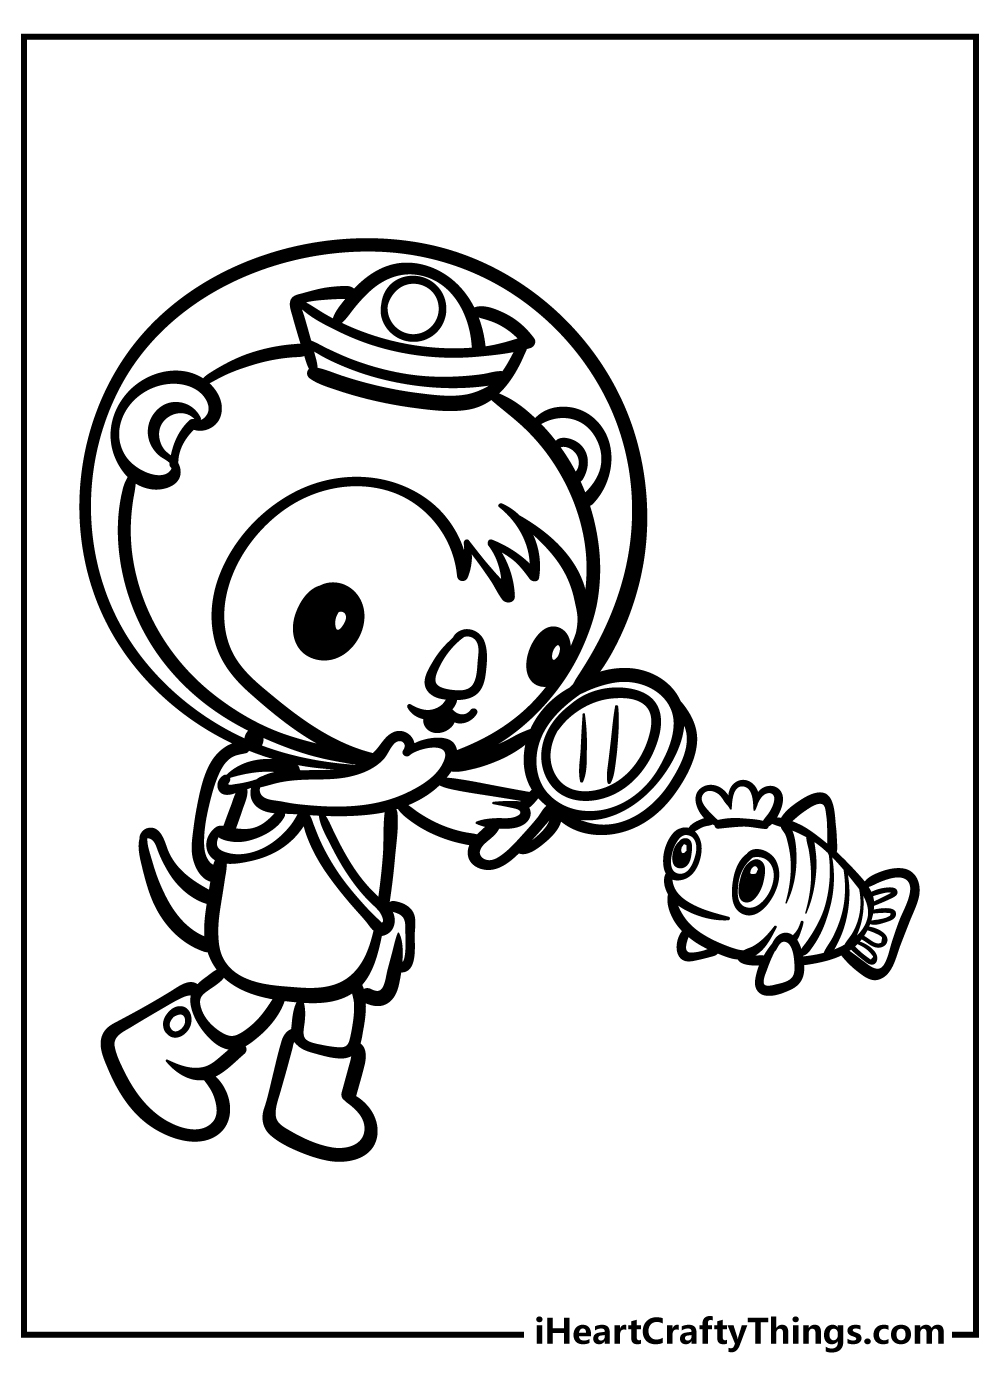 Octonauts Coloring Sheet for children free download